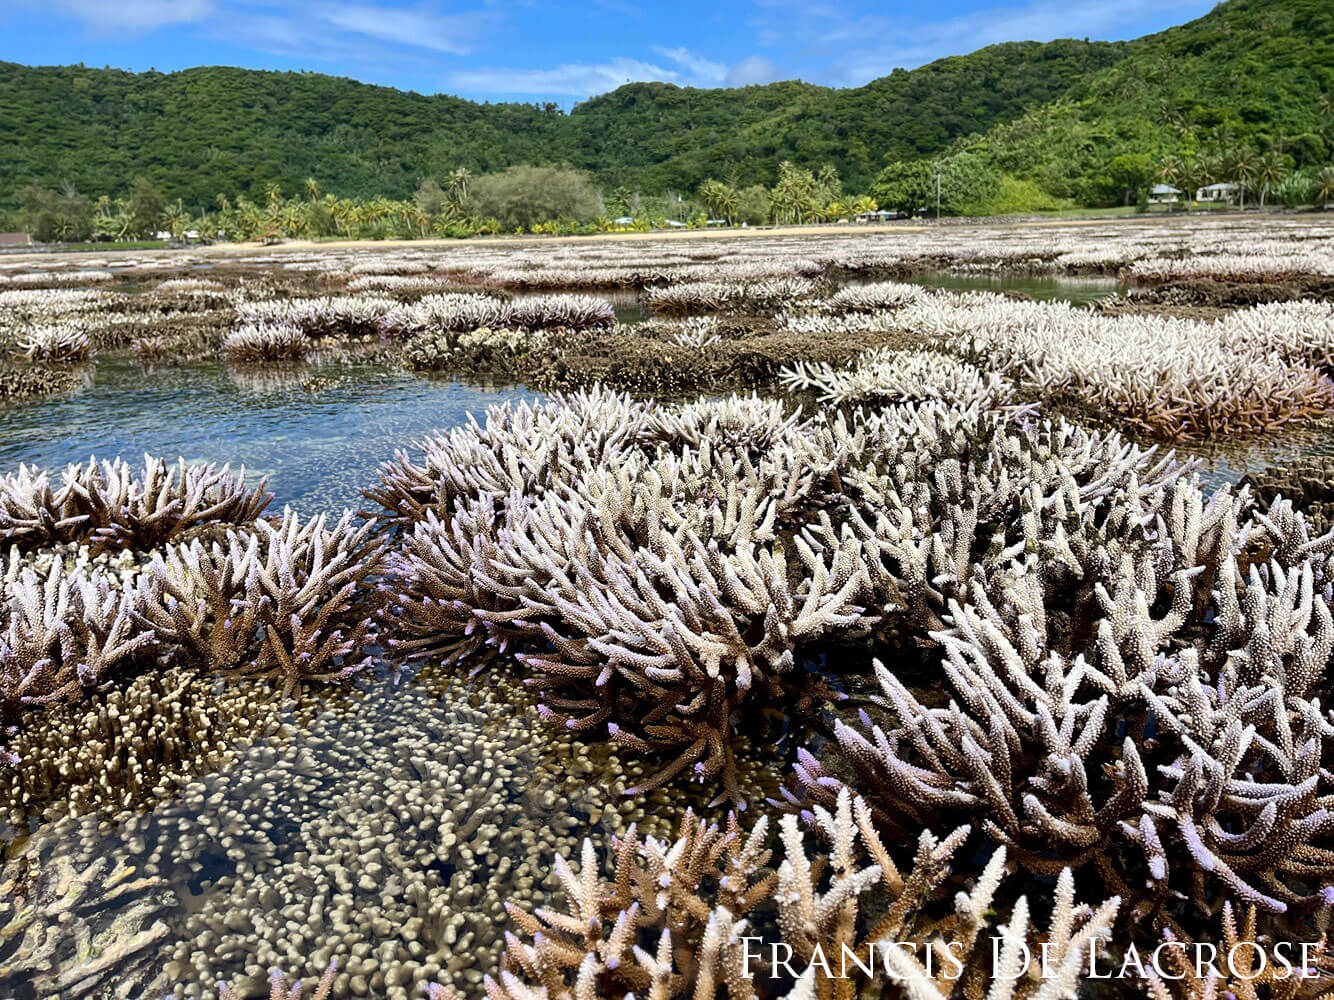 Coral reef exposed by low tide.